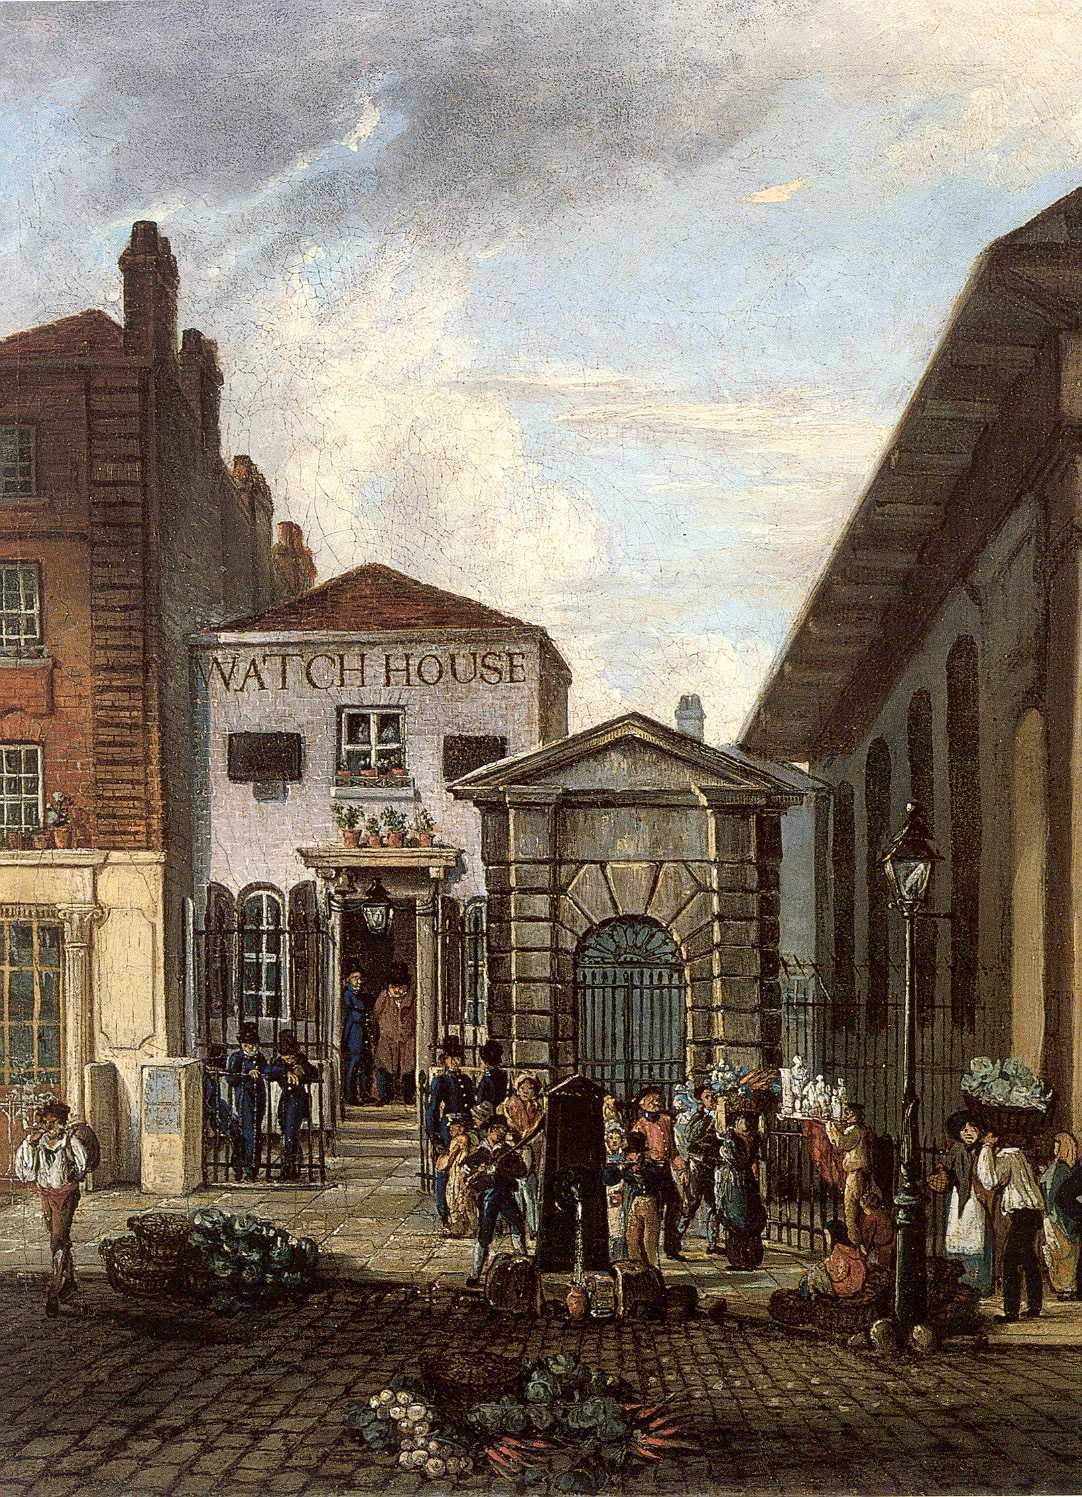 Covent Garden watch house, located next to the church of St. Paul Covent Garden.  A two storey white building with 'Watch House' painted on its upper floor is shown with a lively street scene in the foreground